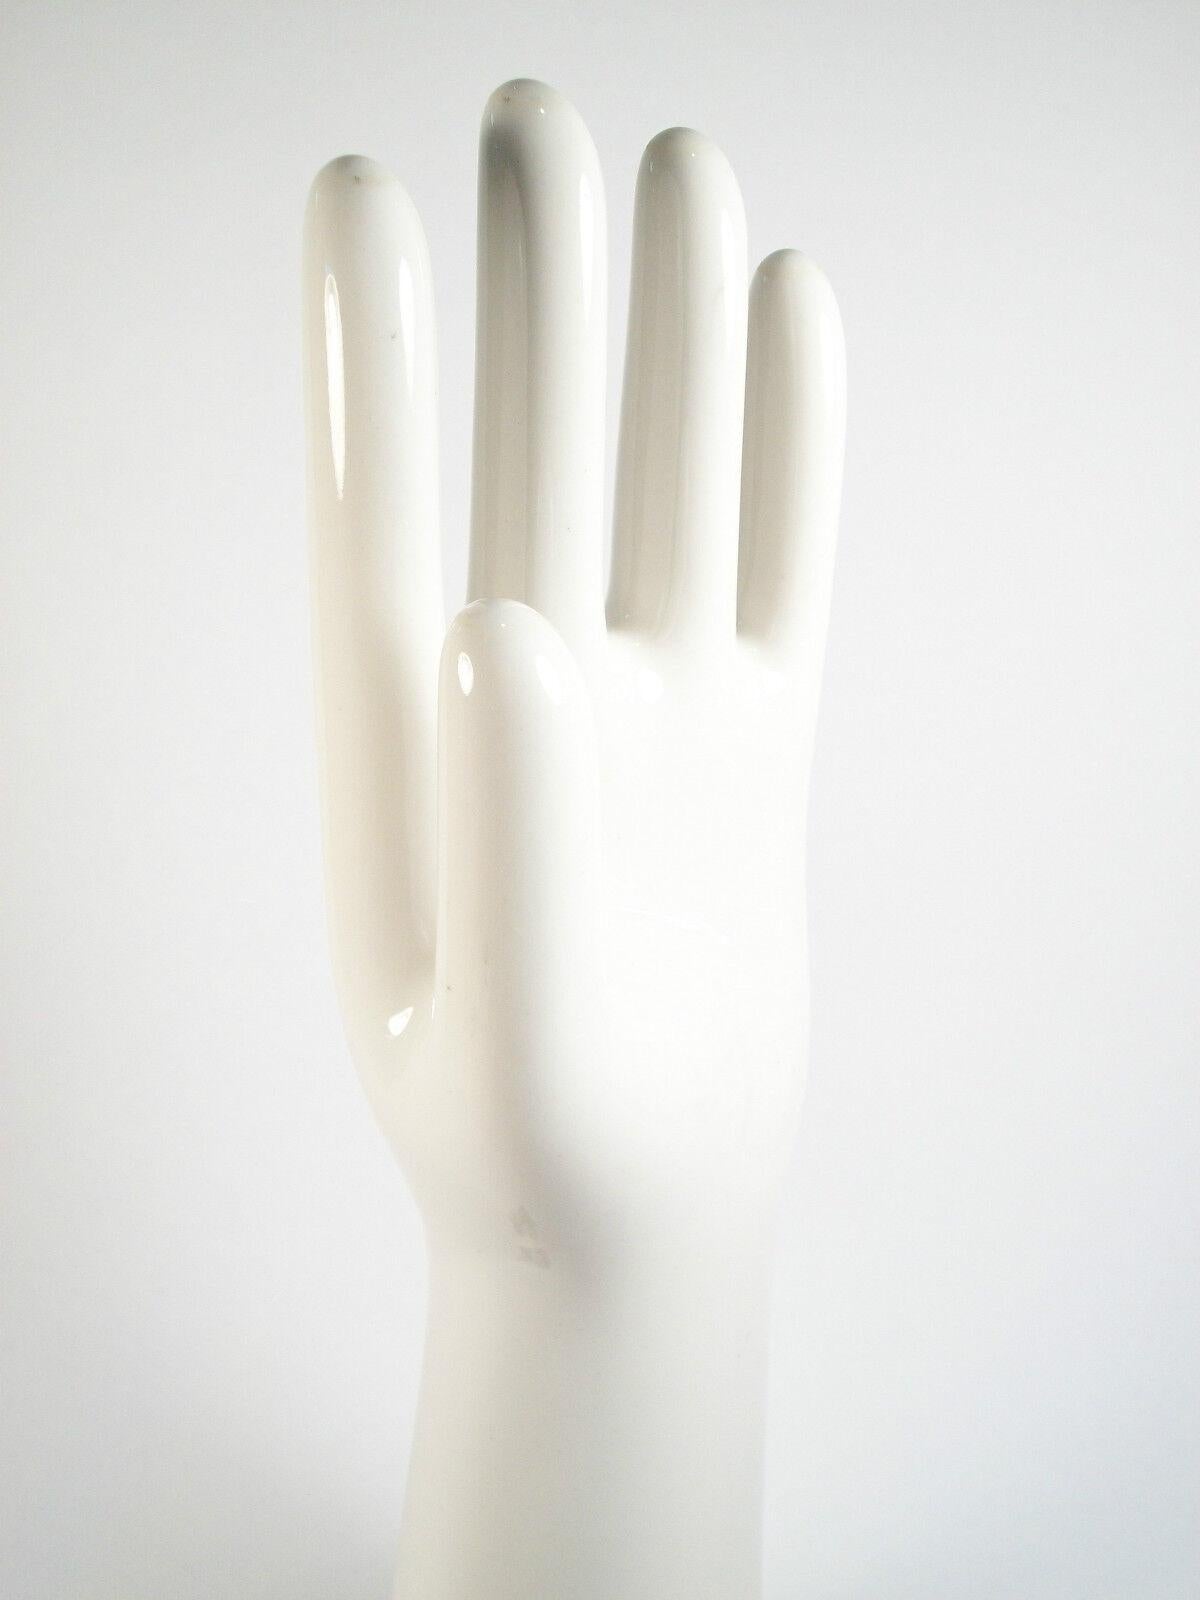 American Antique Ceramic Industrial Glove Mold - U.S. - Late 19th Century For Sale